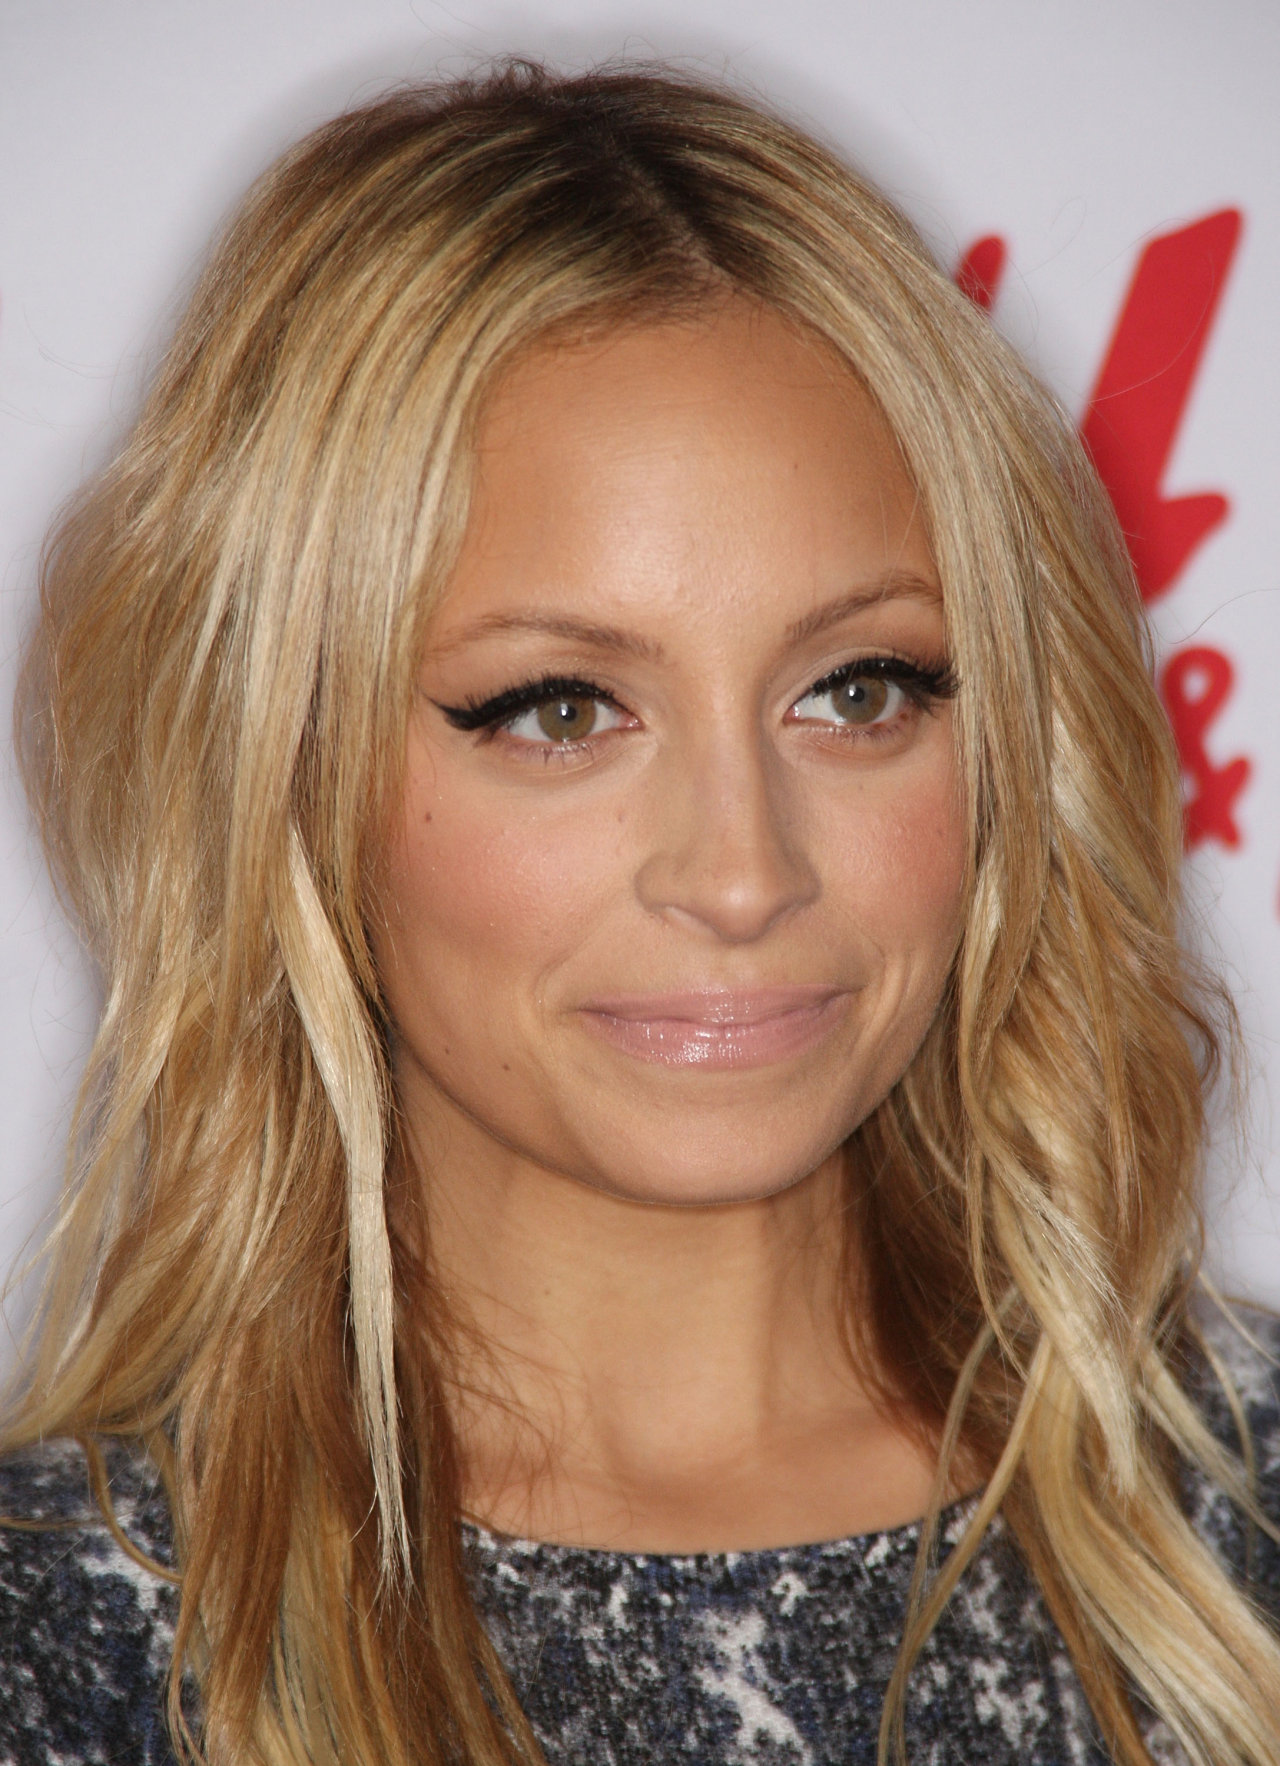 Nicole Richie leaked wallpapers